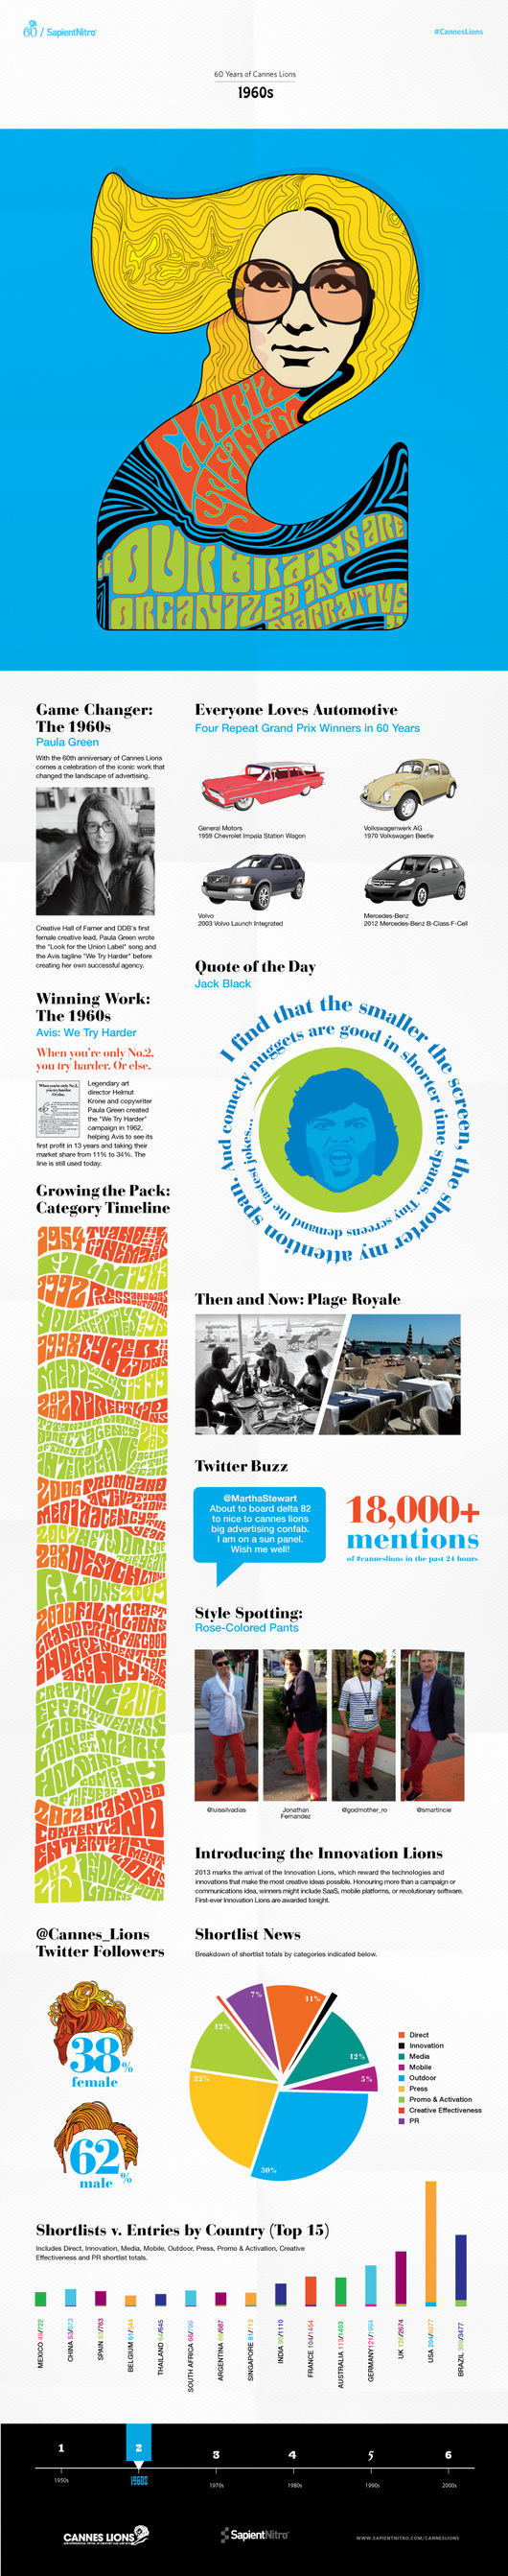 Cannes-Lions-Infographics-The-60s.jpg